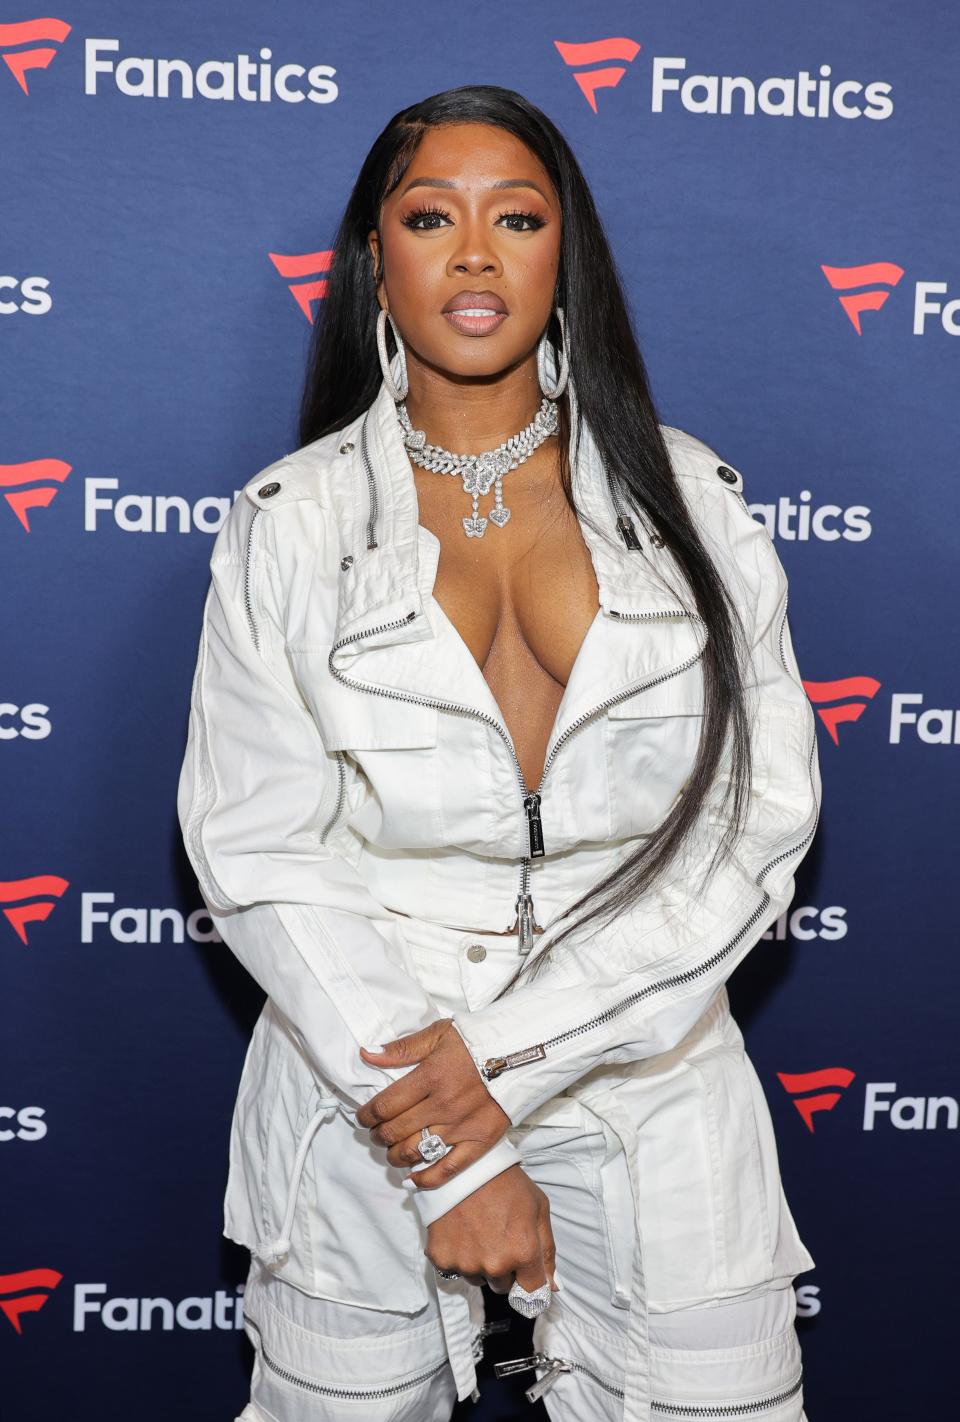 Remy Ma's son, 23-year-old Jayson Scott, was reportedly arrested this week on charges of first- and second-degree murder in a fatal shooting.